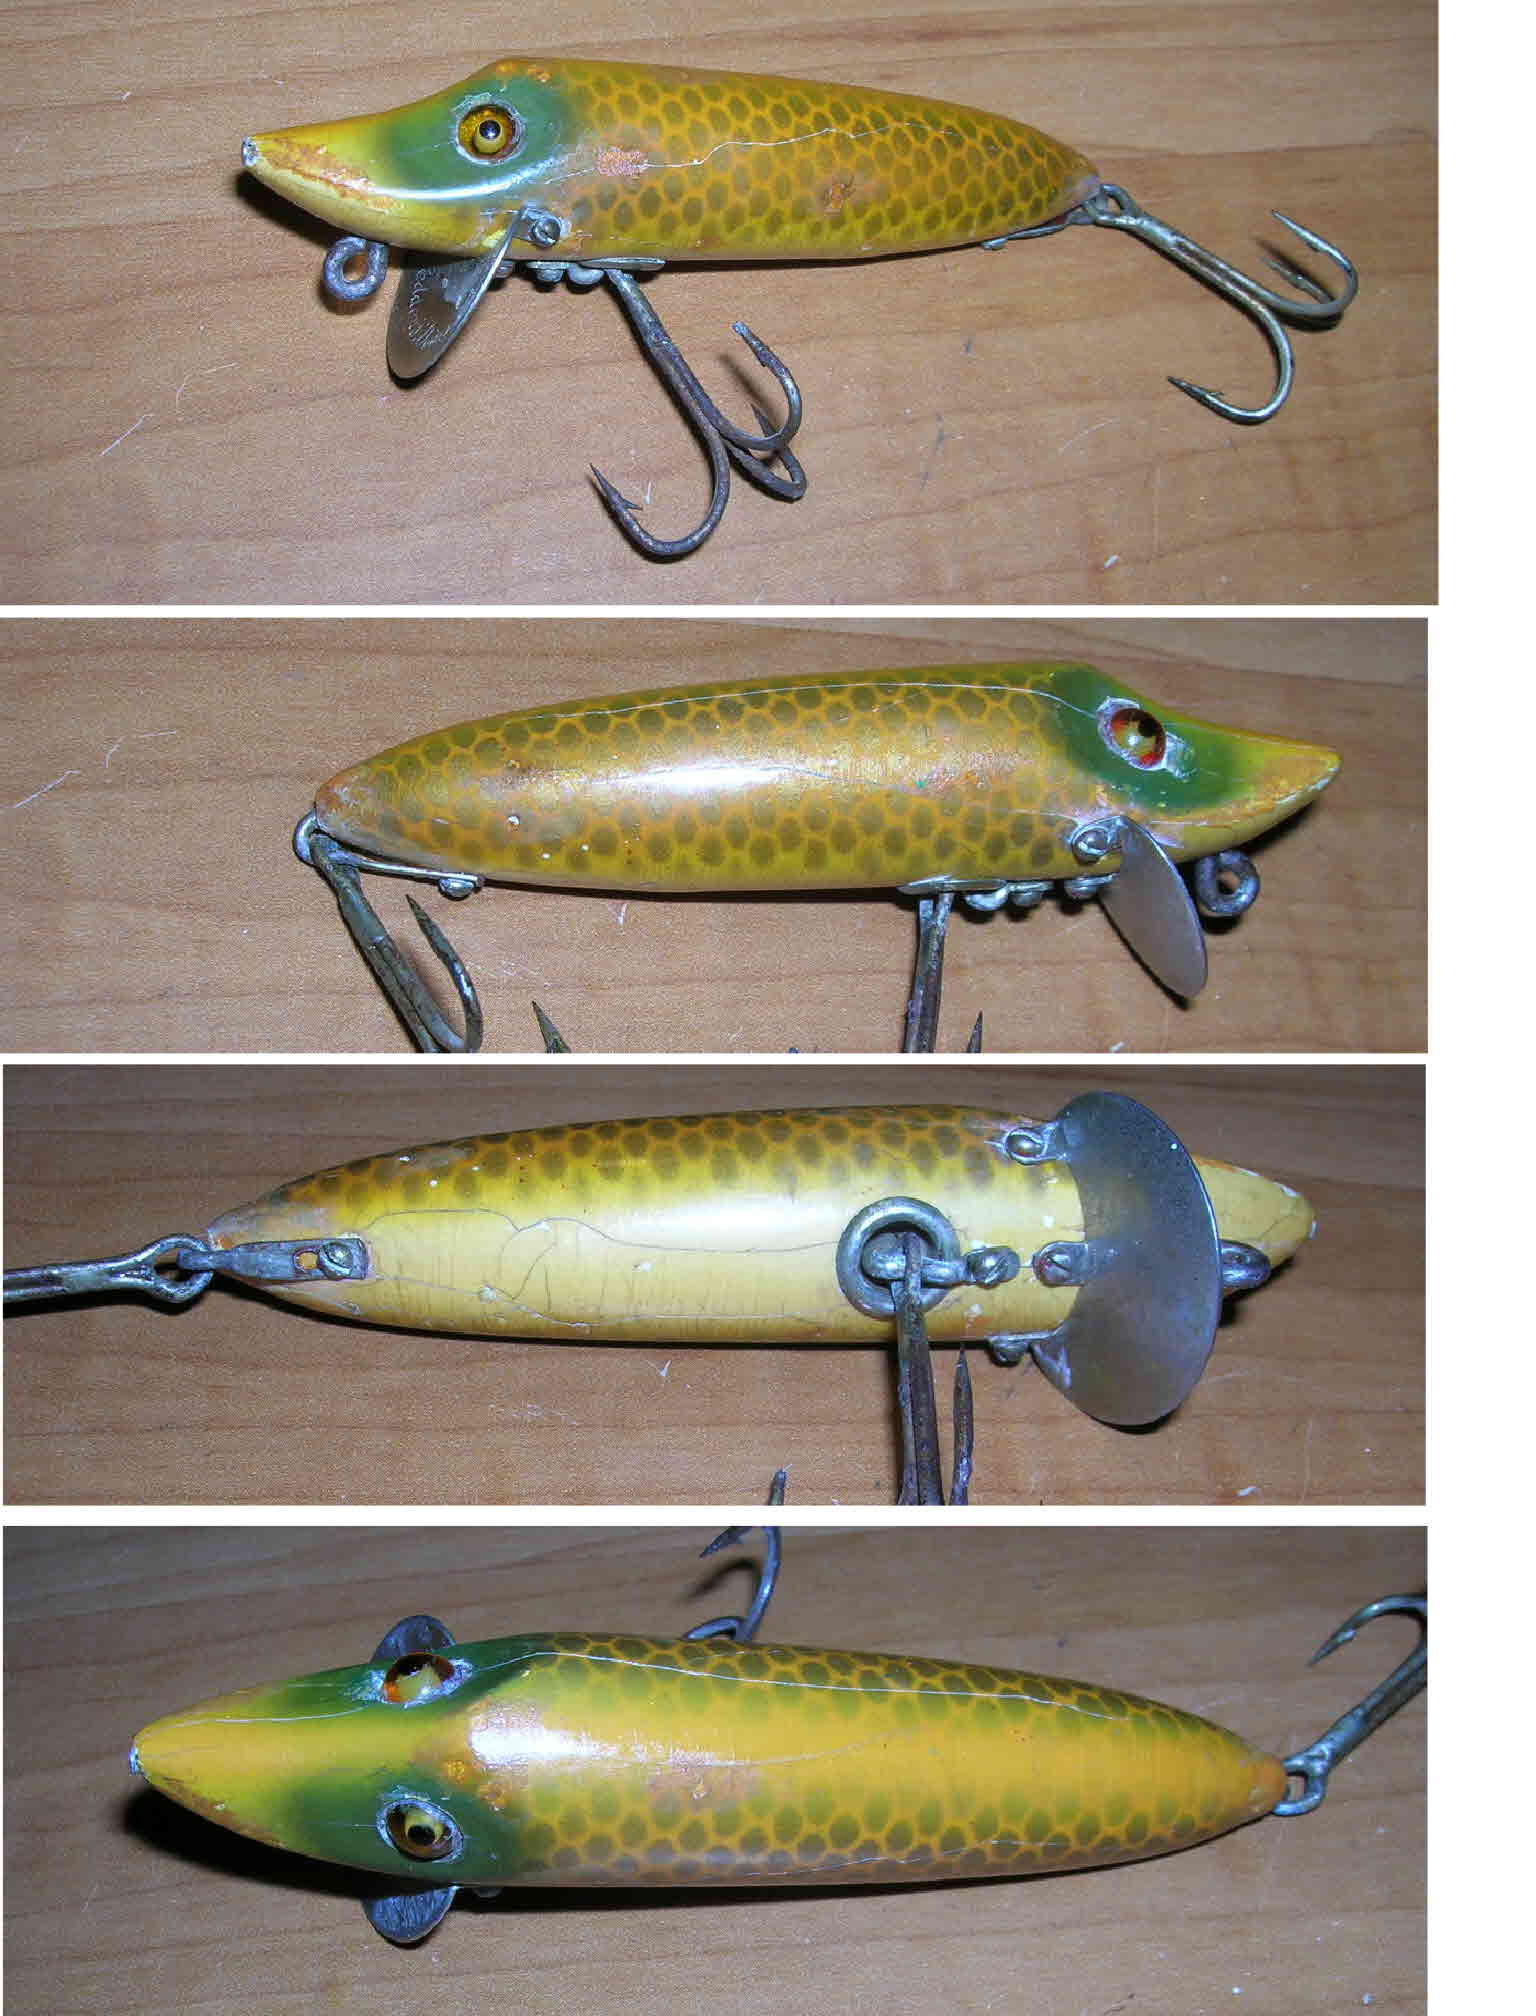 1930s Heddon Fishing Lures Featured on Collector's Envelope *A327 